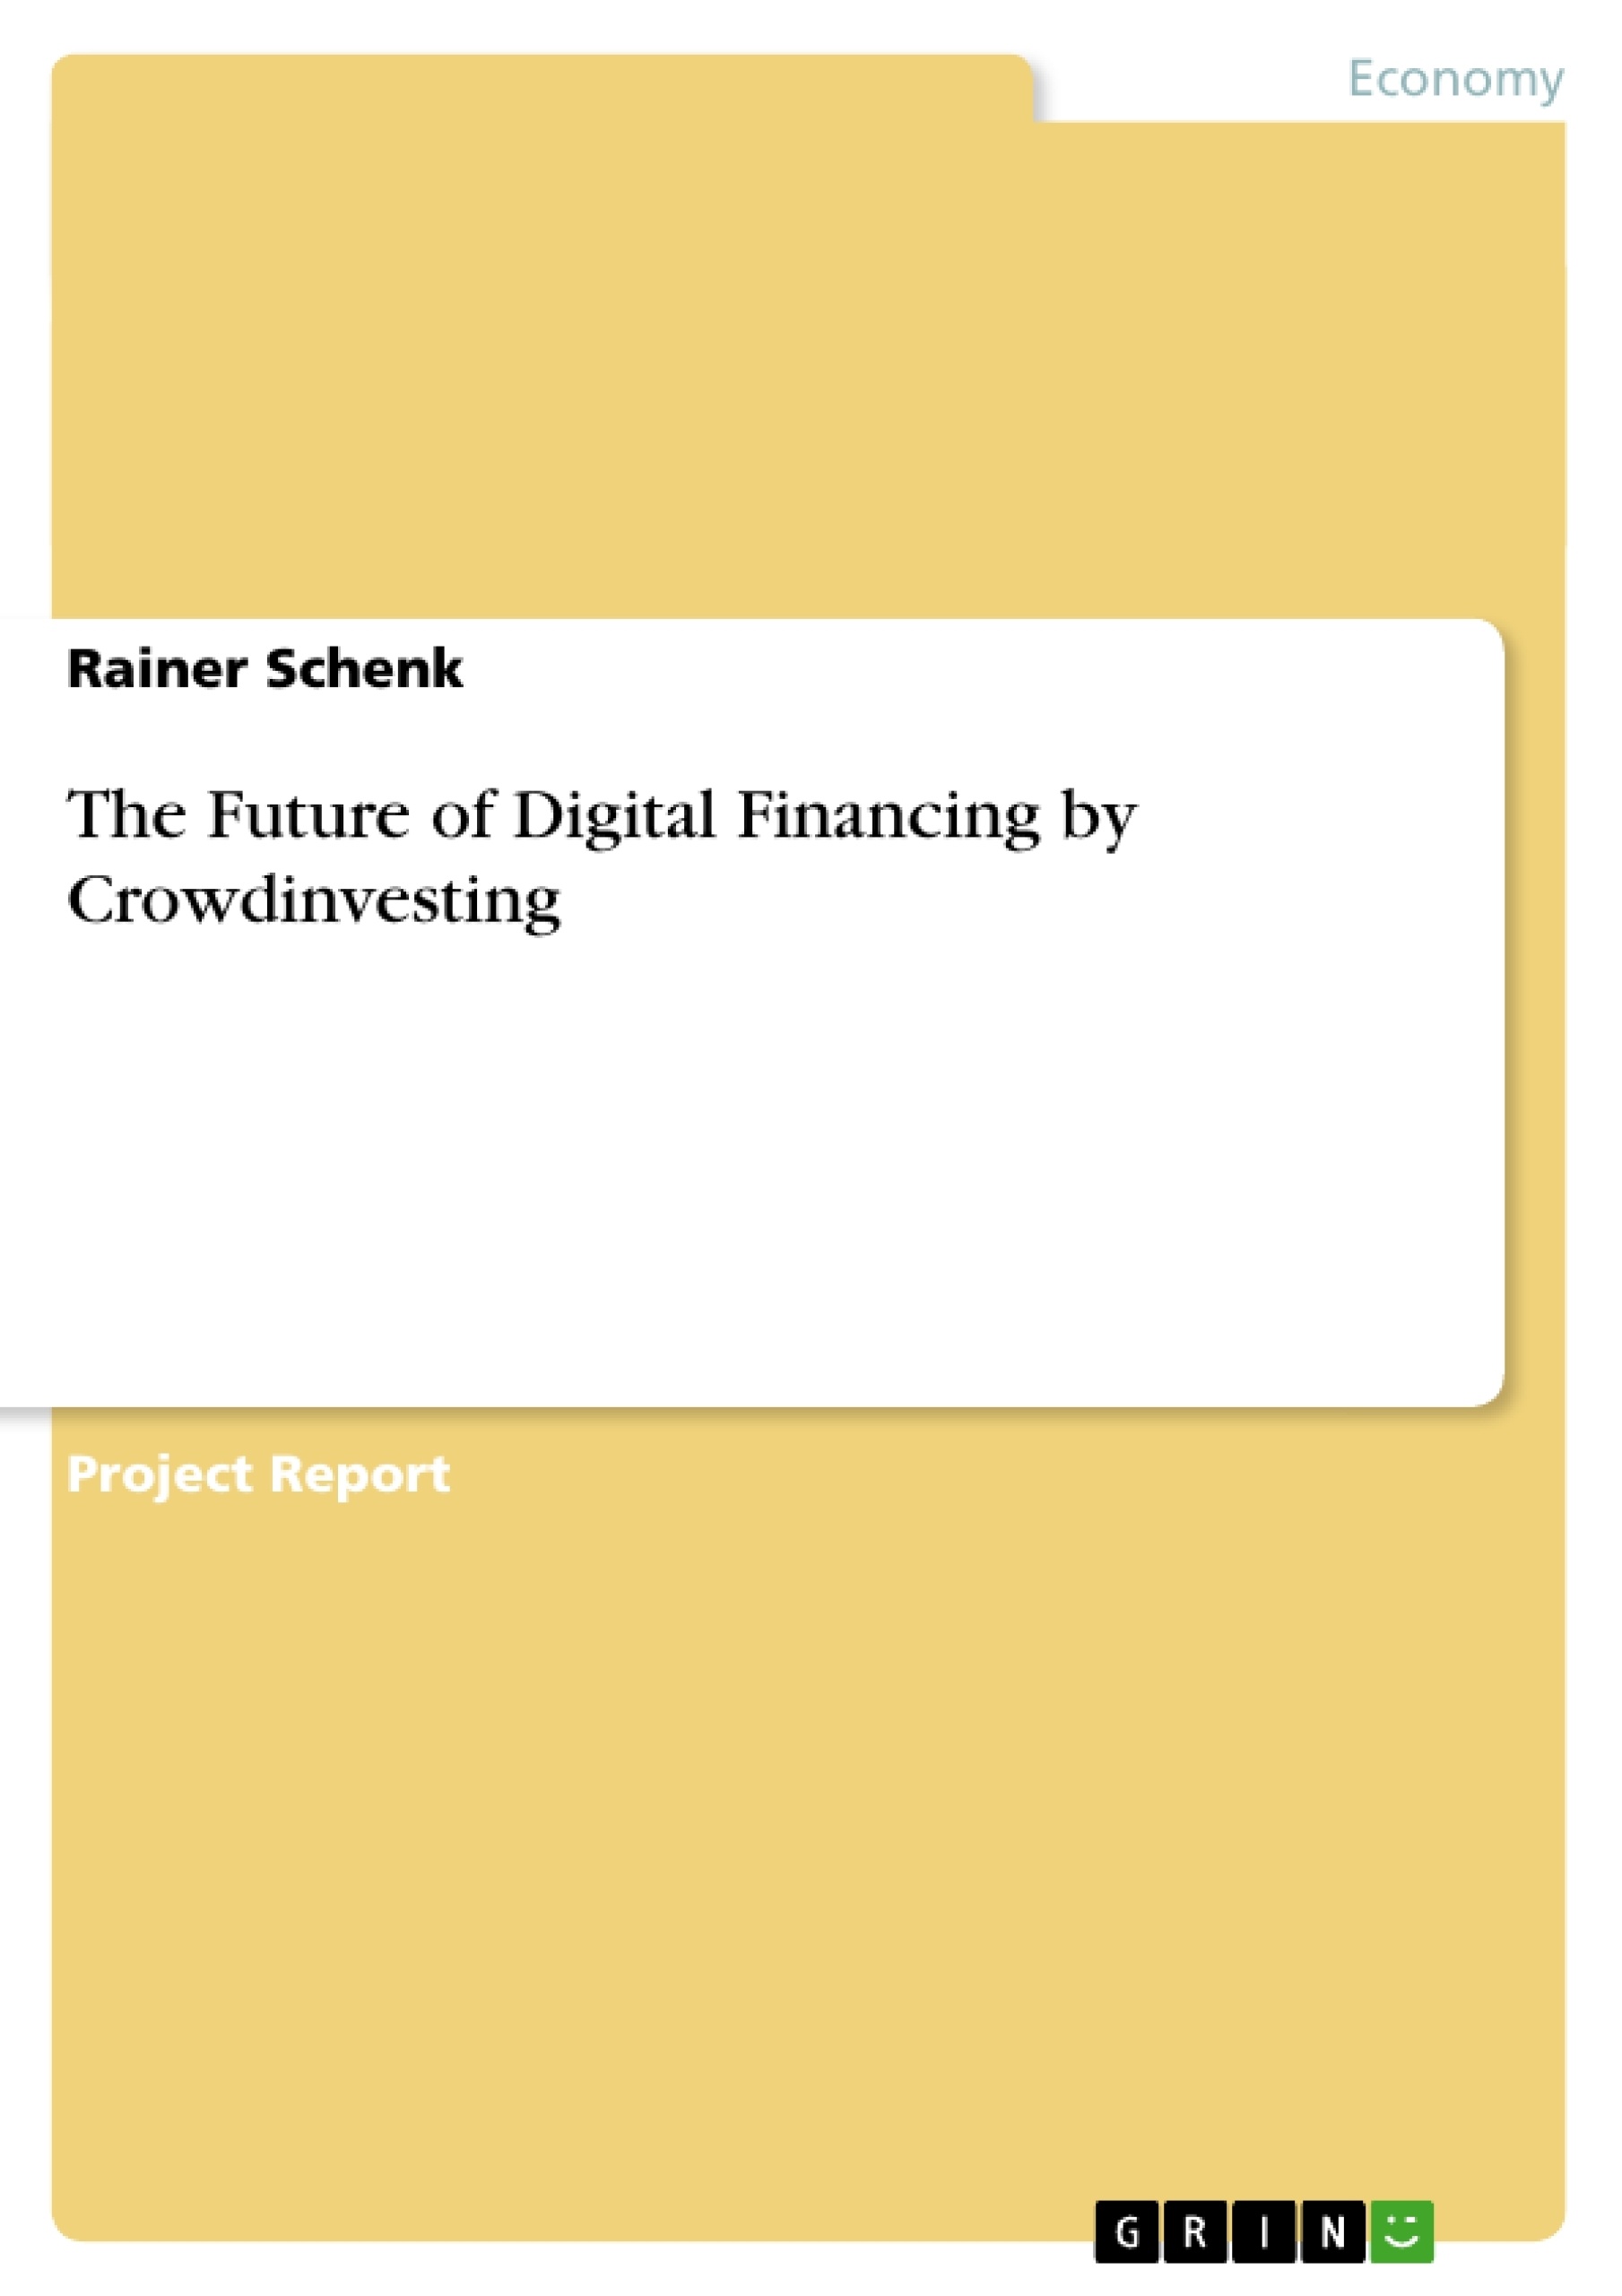 Title: The Future of Digital Financing by Crowdinvesting